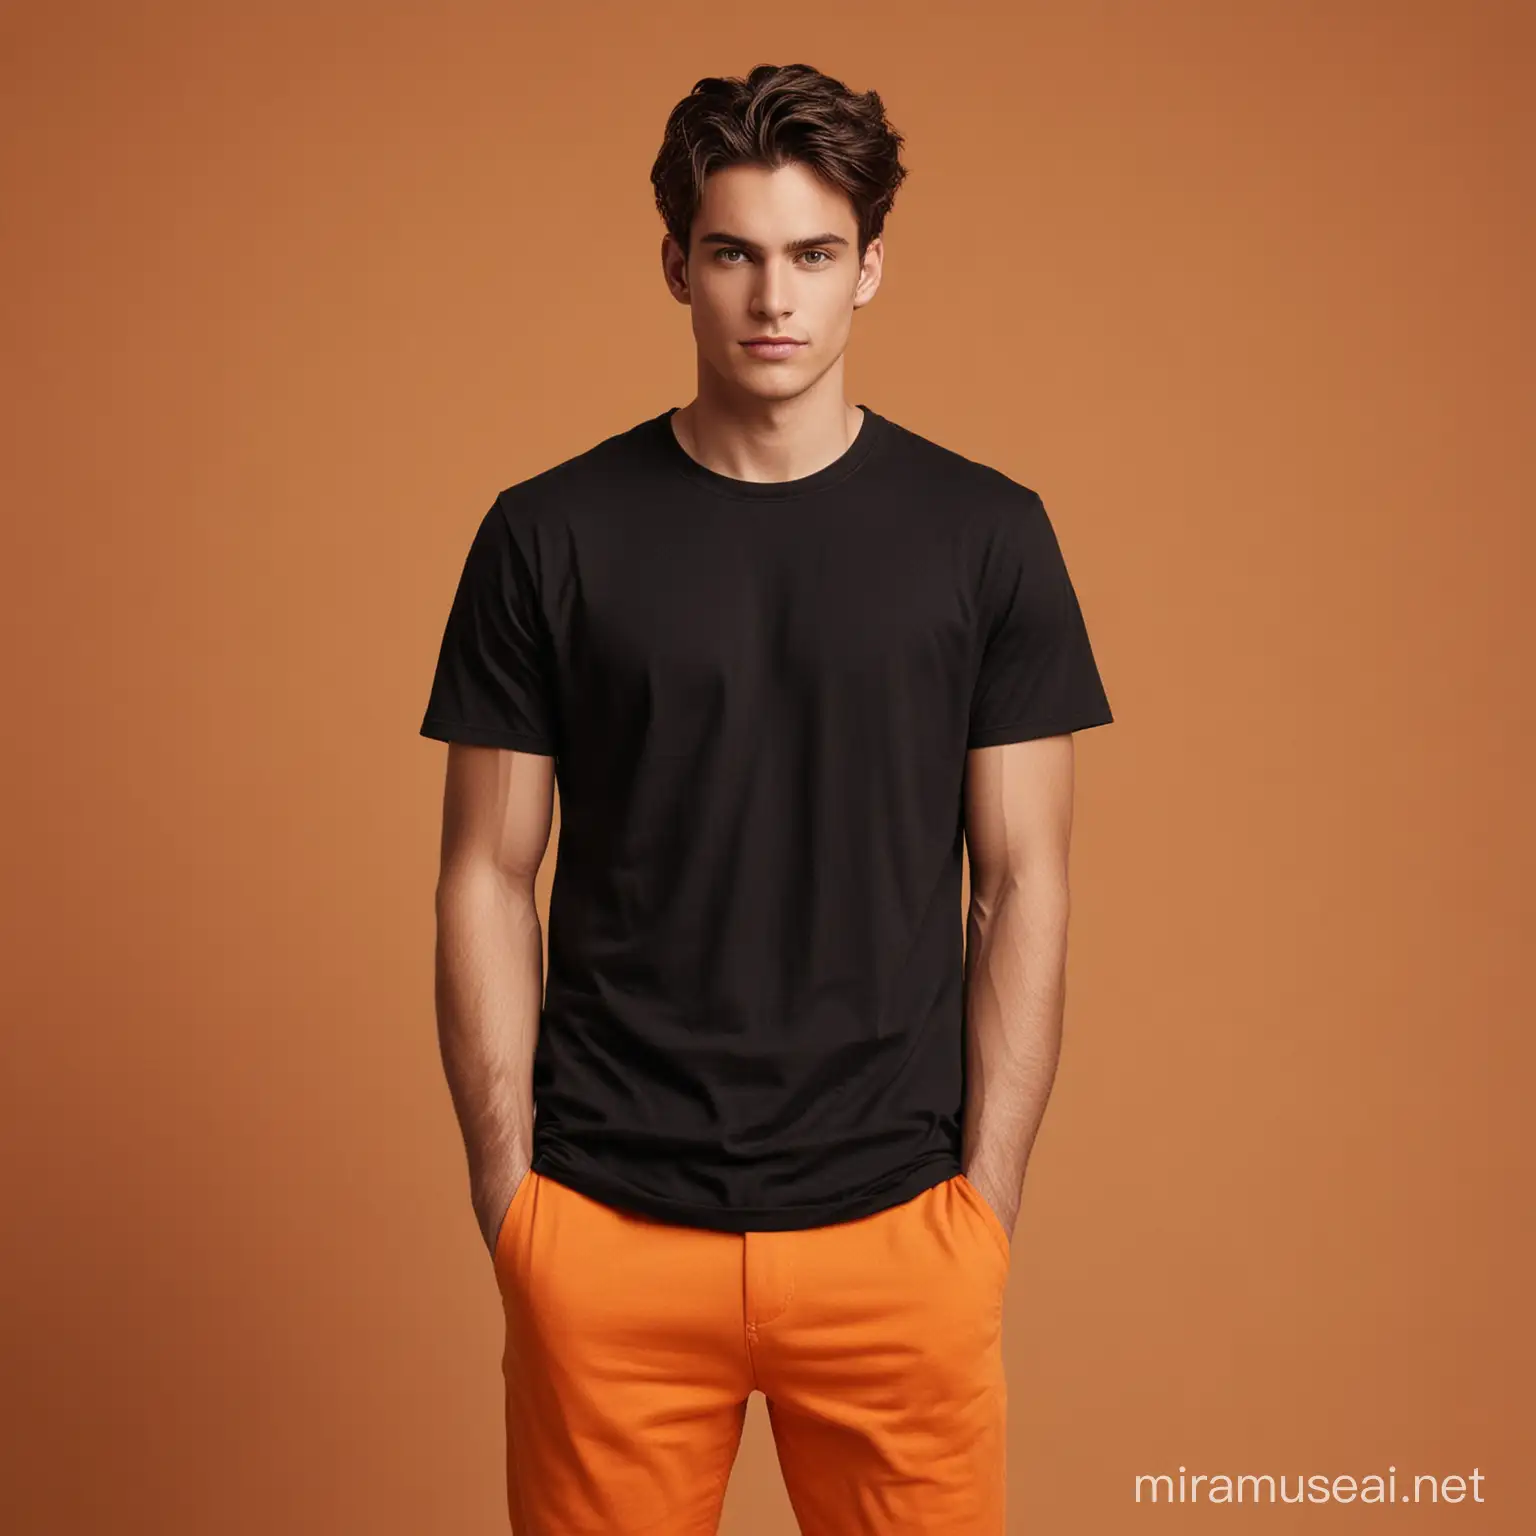 create for me a male model wearing a black T-shirt without prints, with a  Orange background.